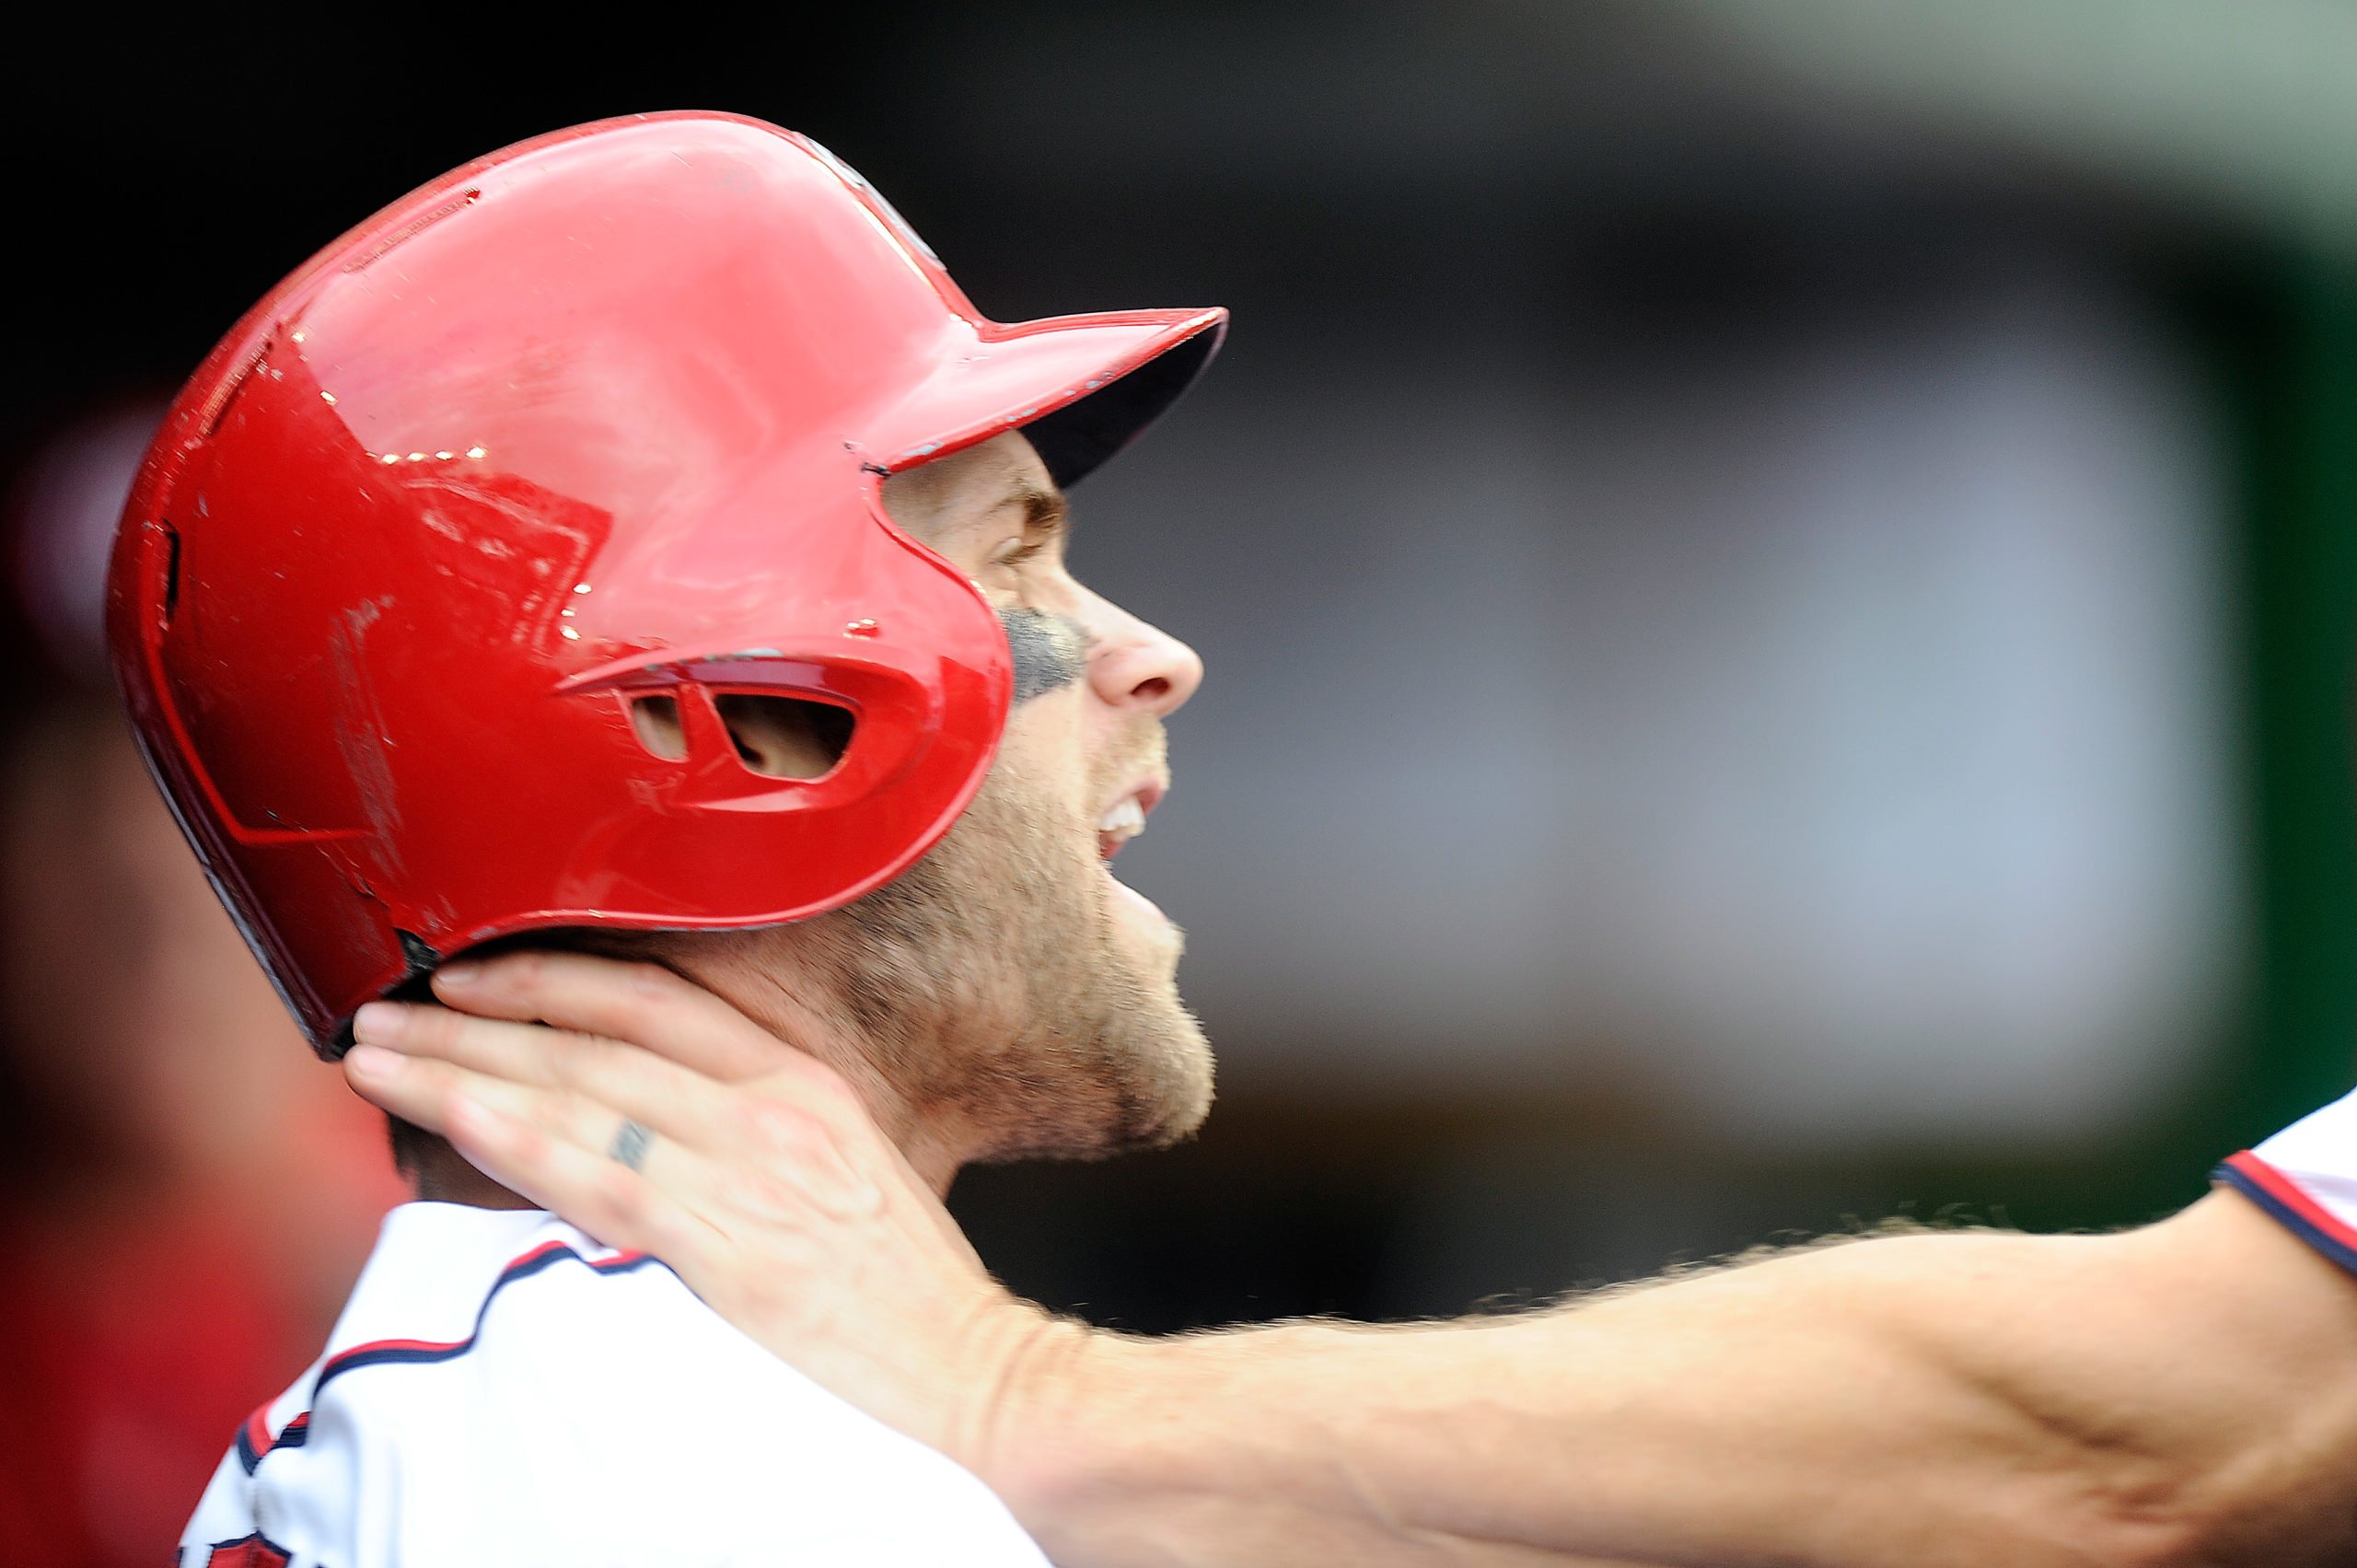 WASHINGTON, DC - SEPTEMBER 27: Bryce Harper #34 of the Washington Nationals is grabbed by Jonathan Papelbon #58 in the eighth inning against the Philadelphia Phillies at Nationals Park on September 27, 2015 in Washington, DC. Greg Fiume/Getty Images